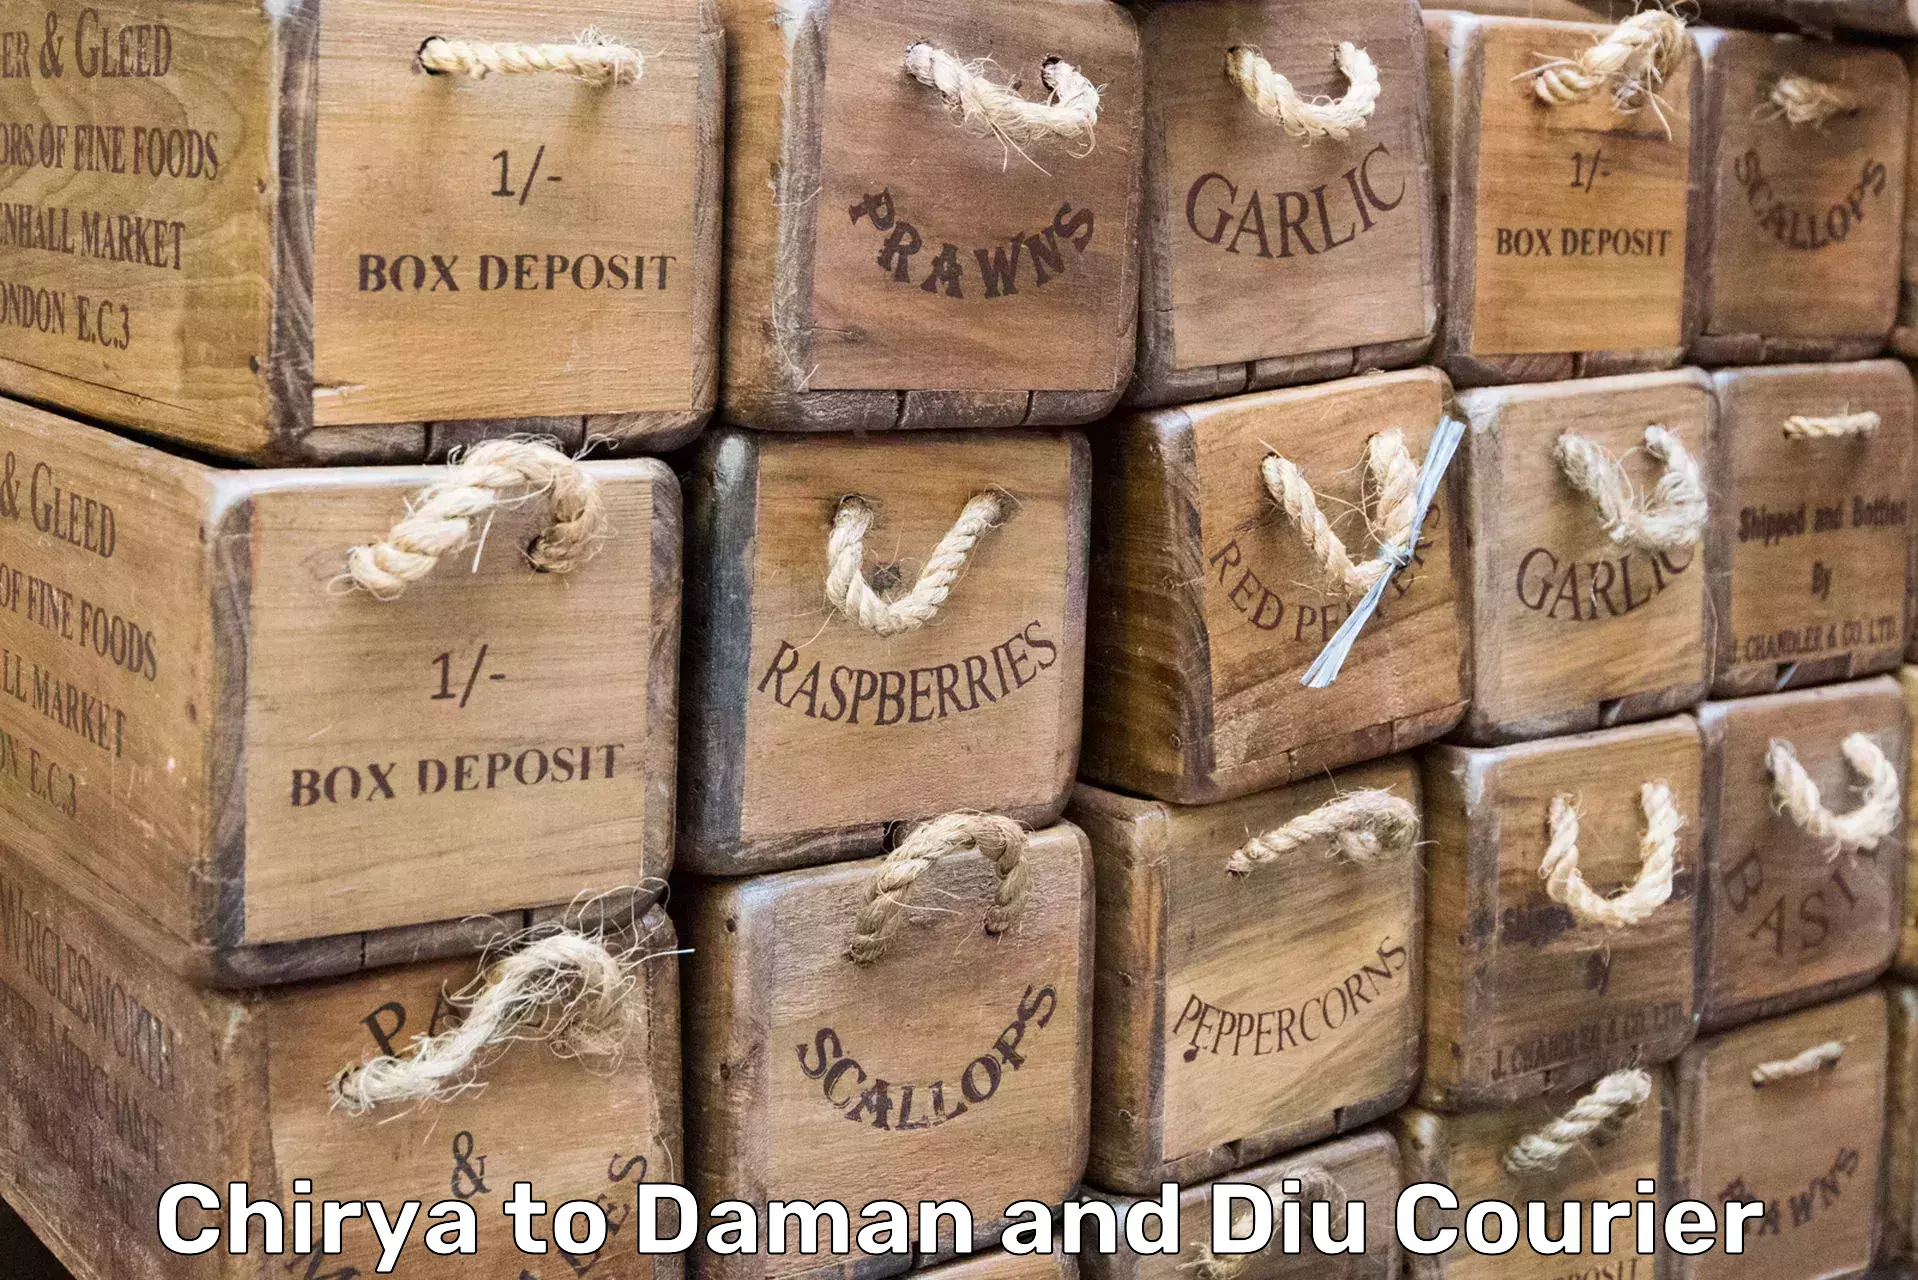 Furniture delivery service Chirya to Daman and Diu